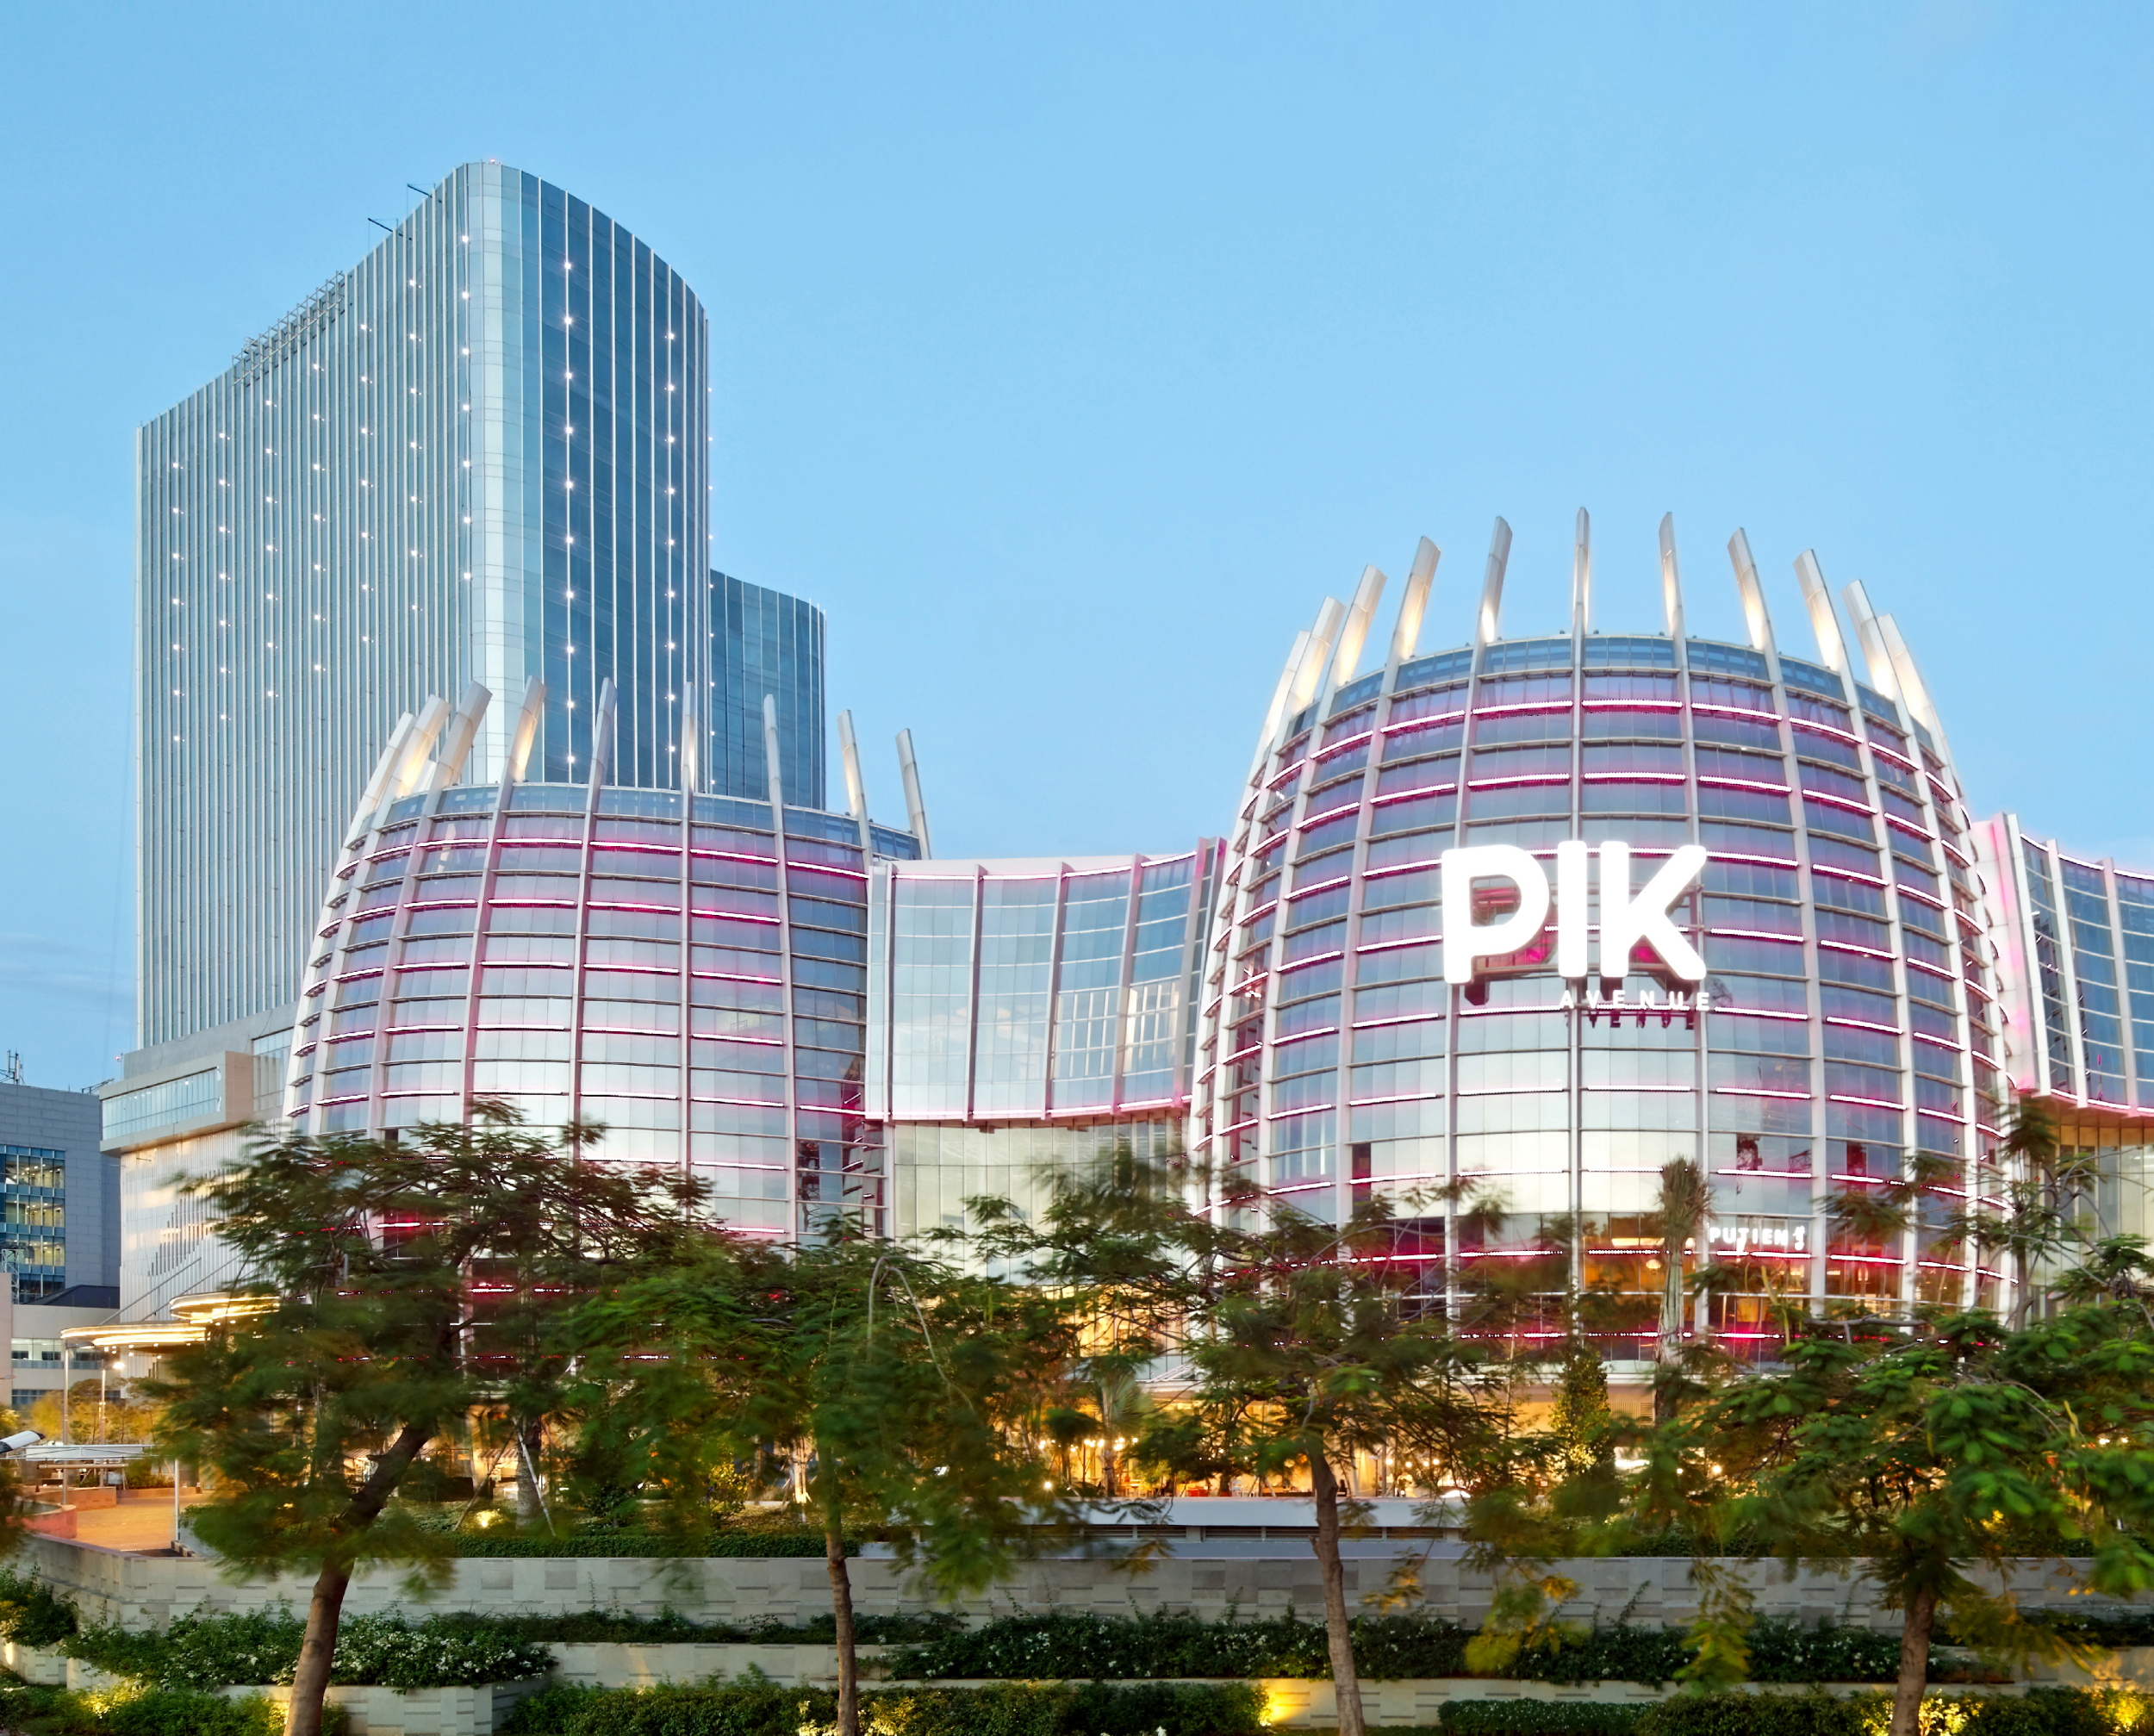 AccorHotels has signed a deal to expand its Swissôtel Hotels and Resorts brand to the bustling city of Jakarta, Indonesia. Scheduled to open mid-2019, Swissôtel Jakarta PIK Avenue is located in a mixed-used lifestyle mall complex. Designed by EDG Design, the hotel will feature 412 rooms, six dining outlets, an executive lounge, a Pürovel Spa & Sport facility as well as one of the city’s largest event spaces of 3,044 square meters that can accommodate up to 3,000 guests in its ballroom. Click to enlarge.